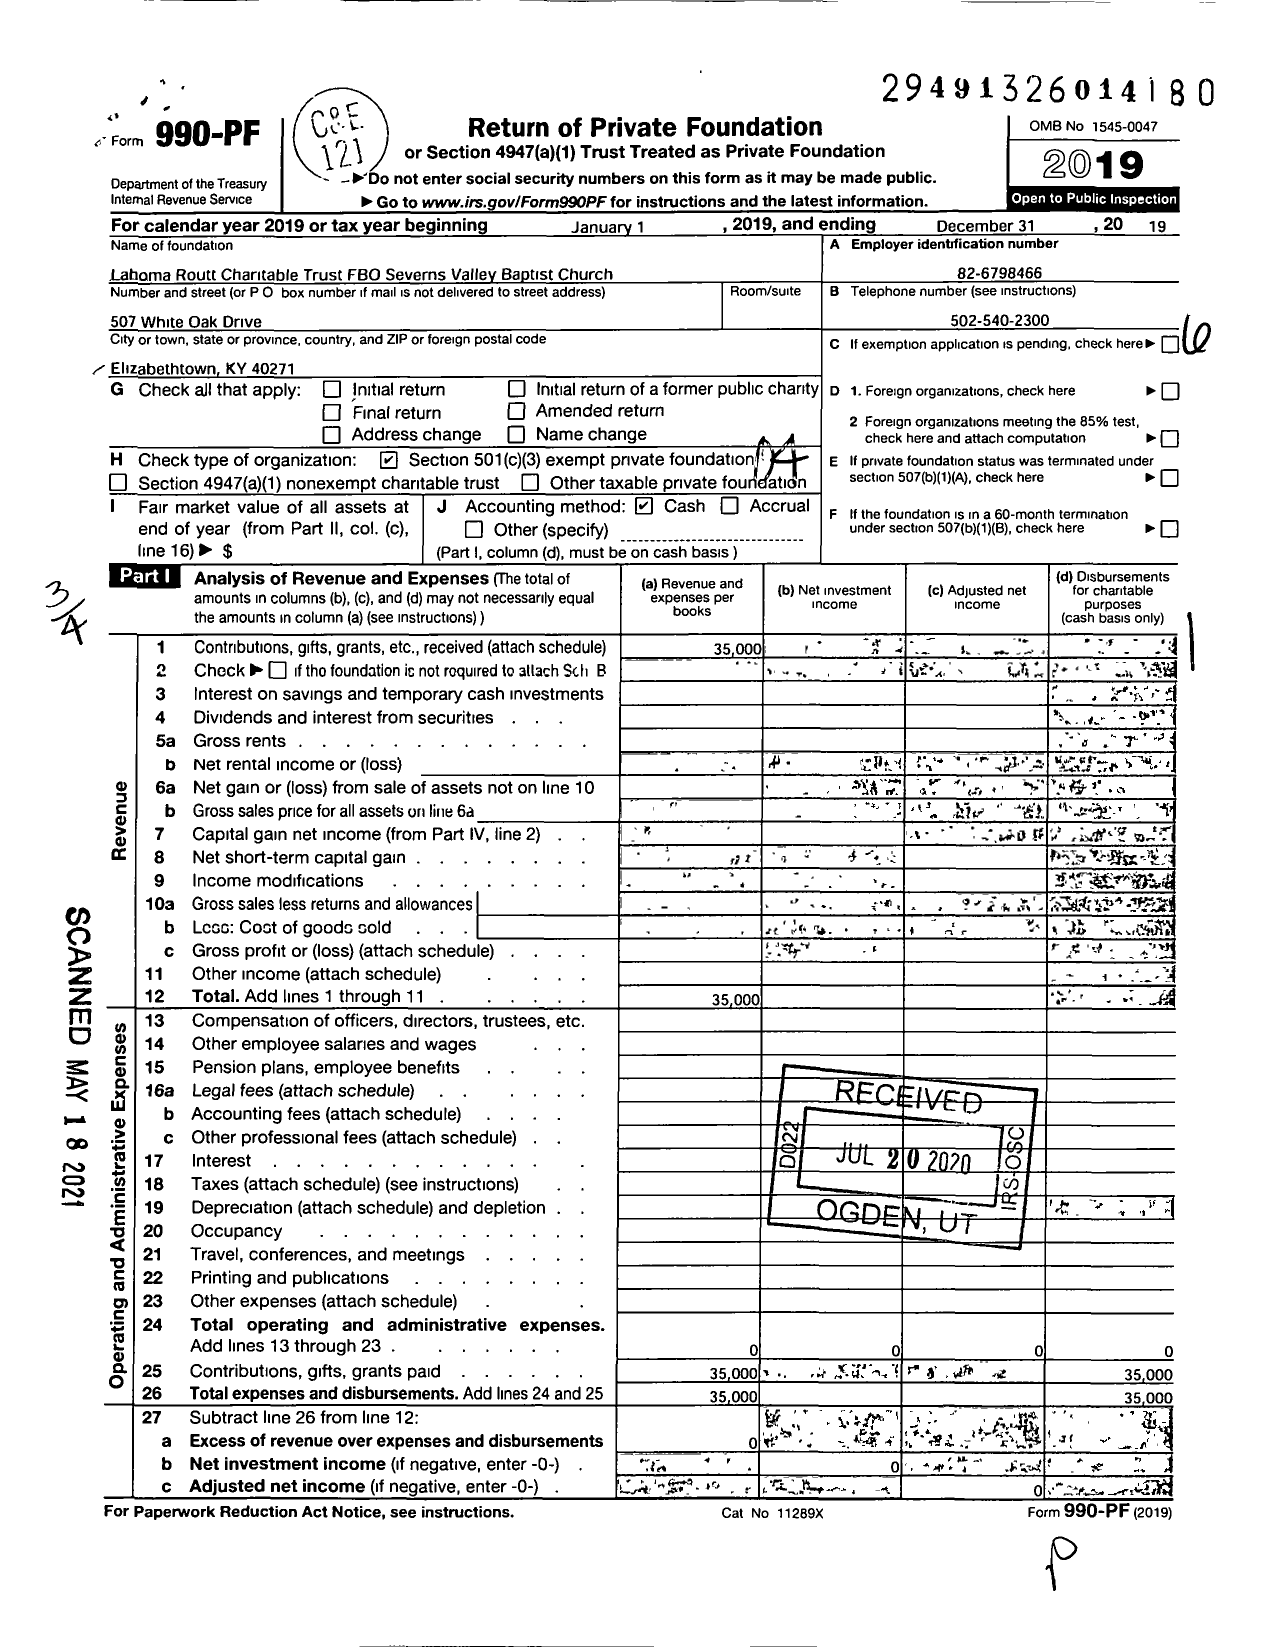 Image of first page of 2019 Form 990PF for Lahoma Routt Charitable TR Fbo Severns Valley Baptist Church